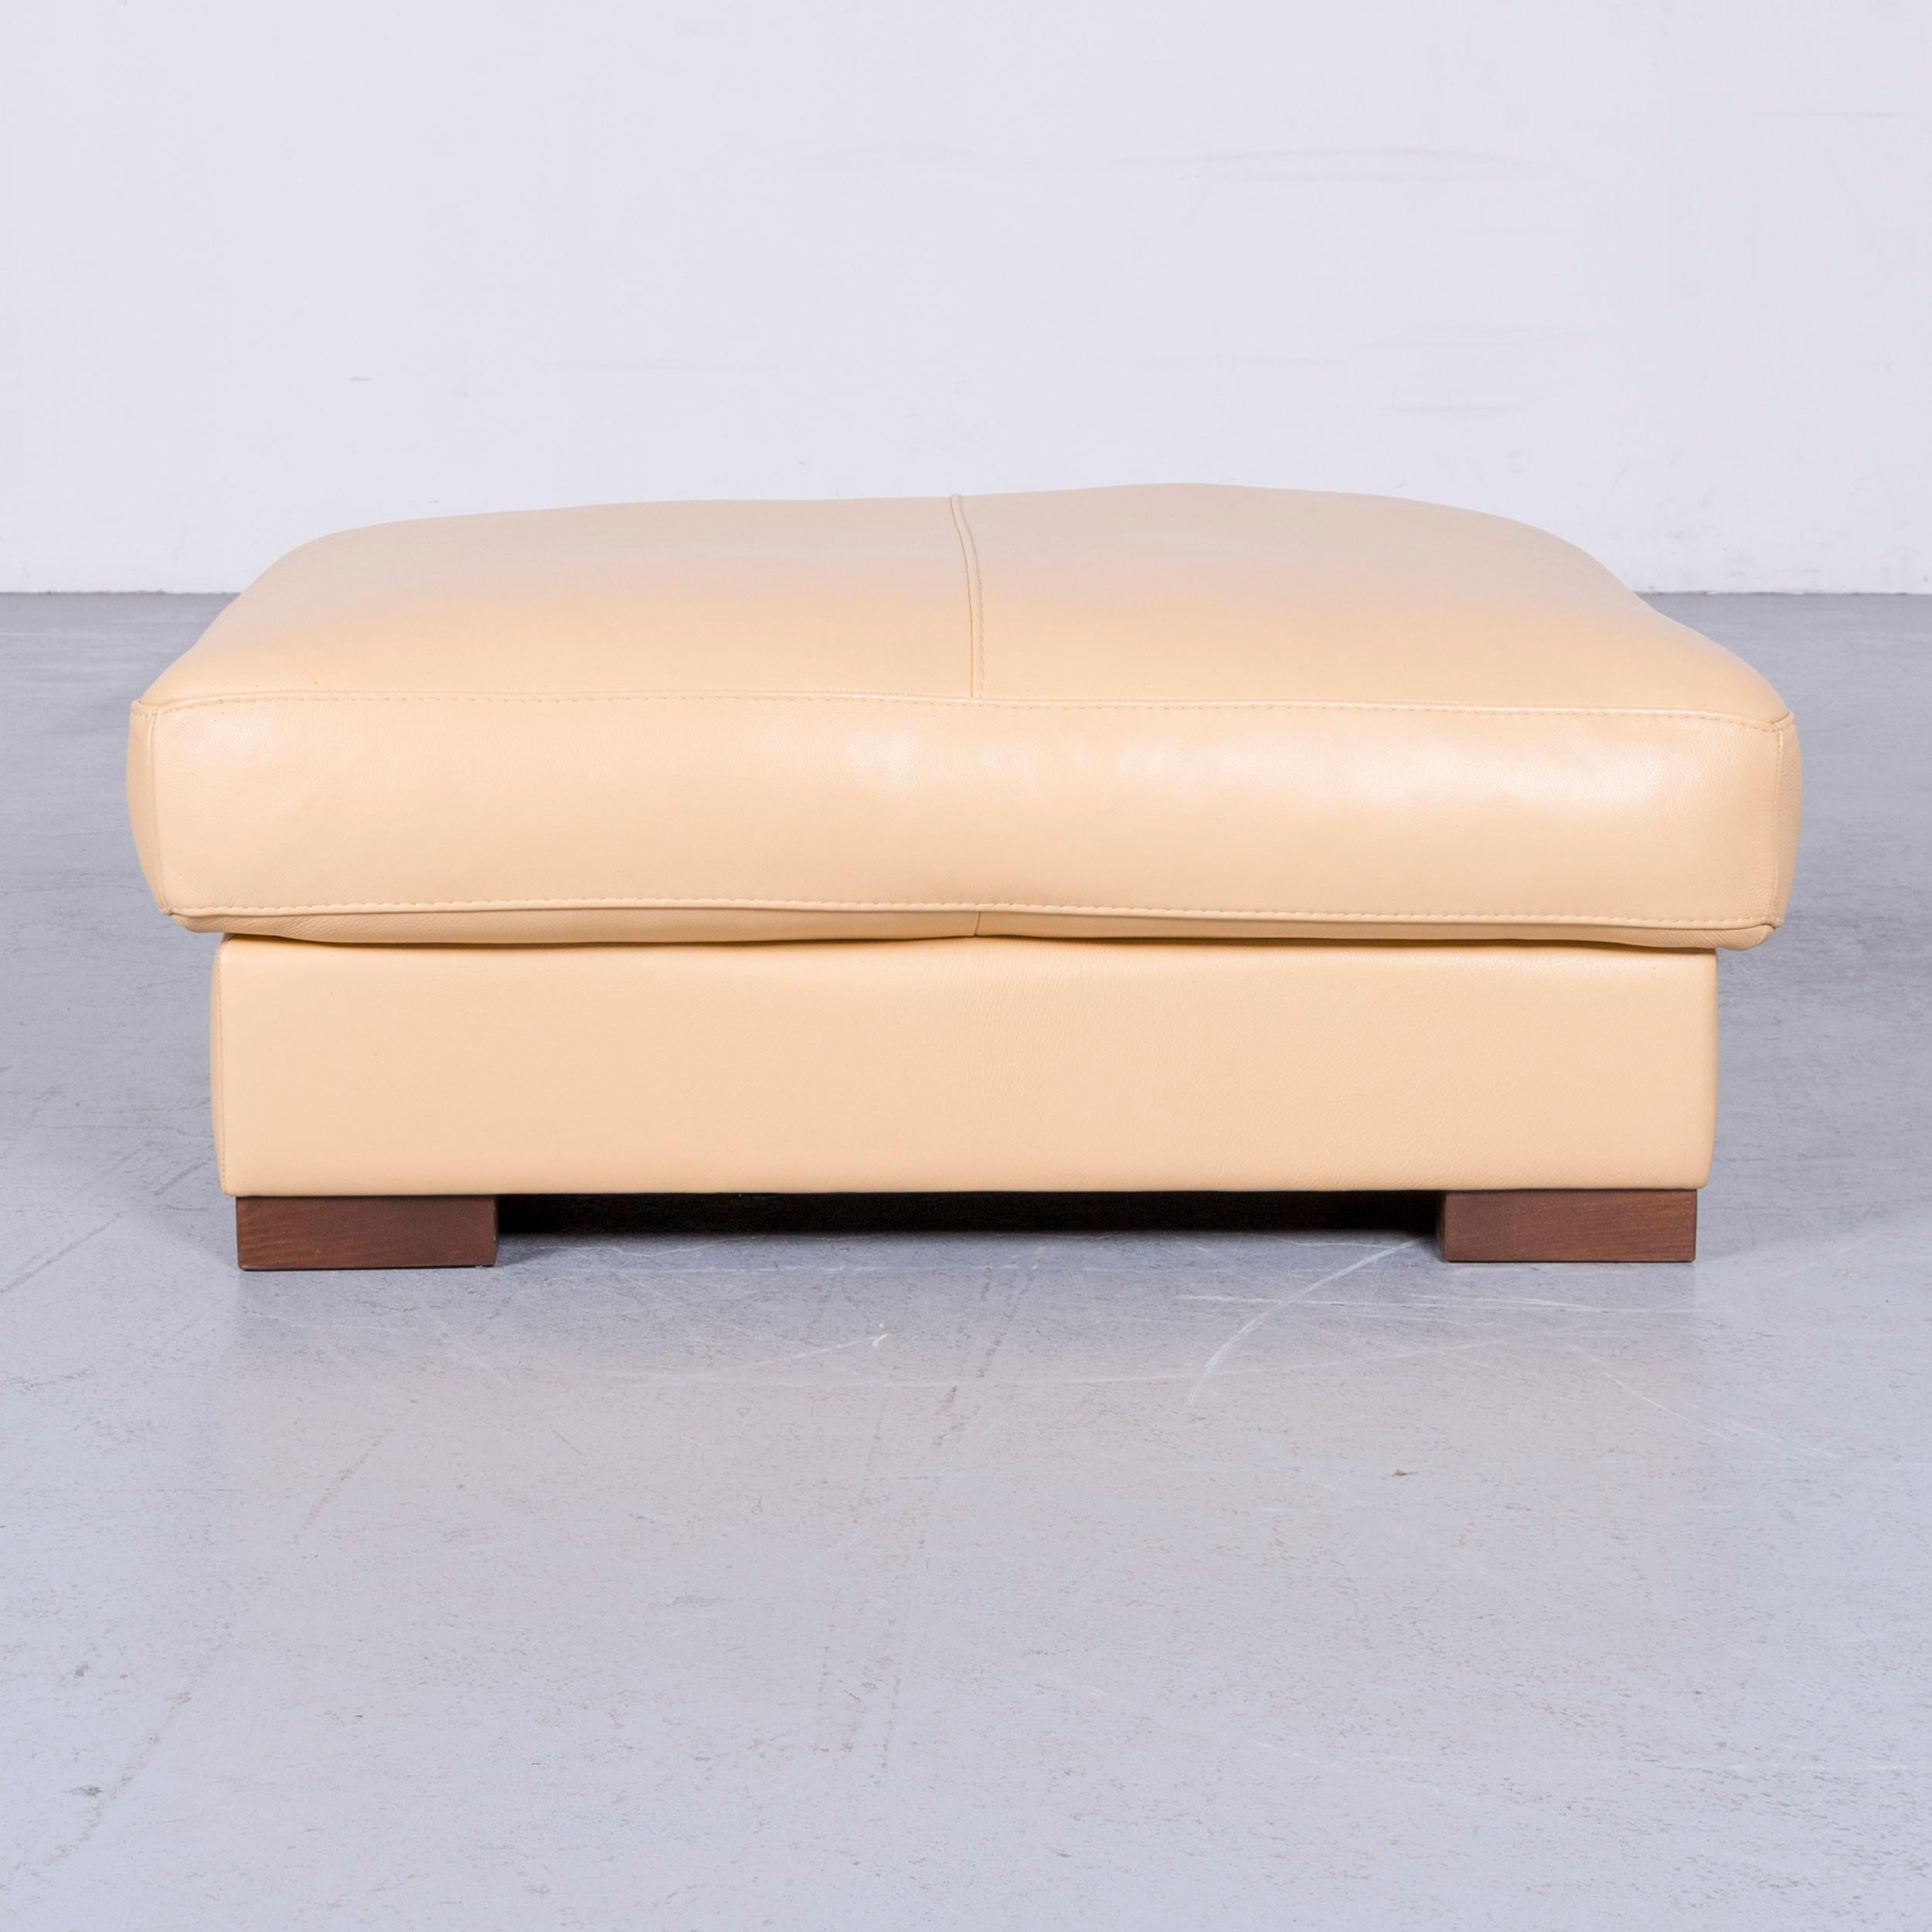 Designer Footstool Anilin Leather Beige One Seat Couch 3